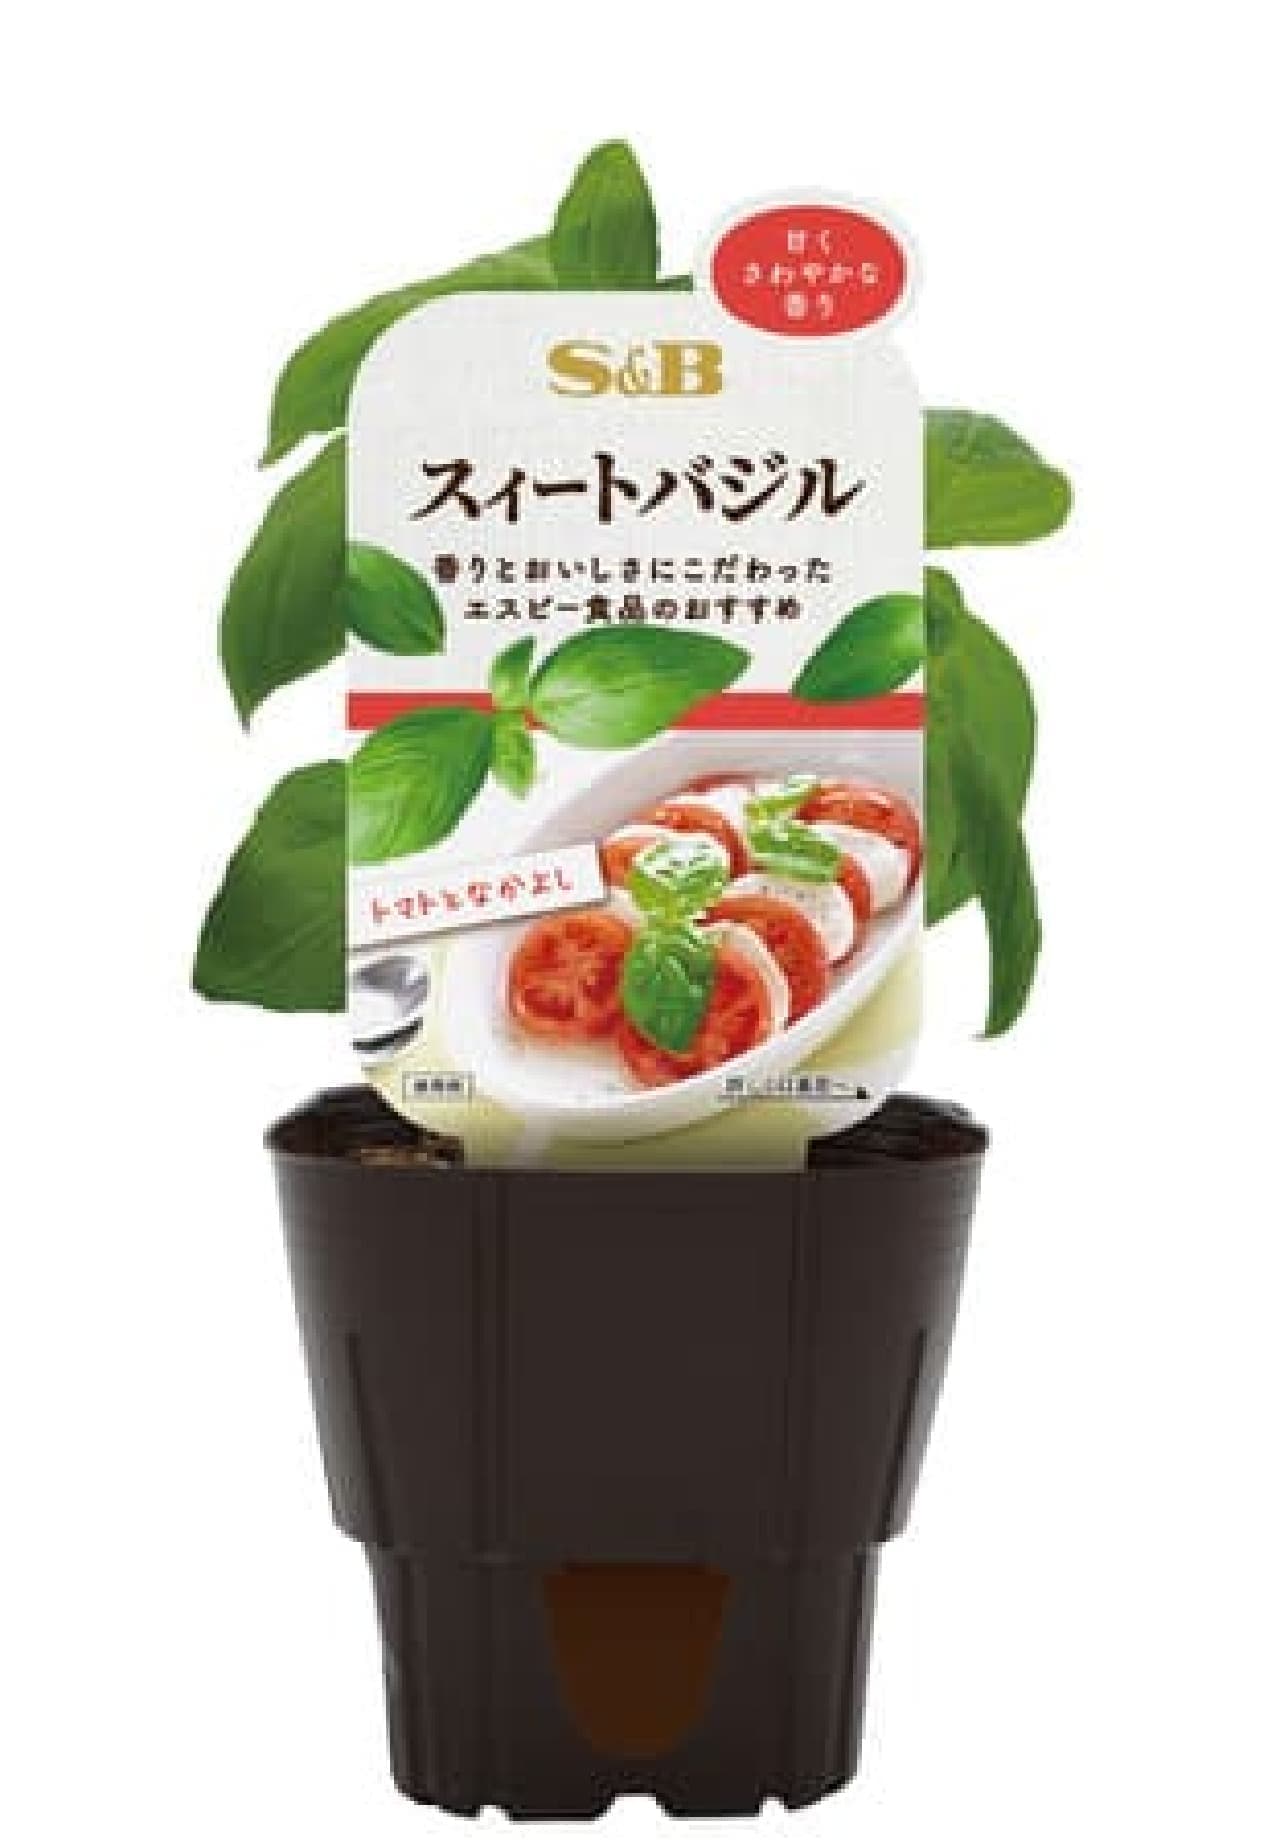 S&B Herb Seedlings" from SB Foods -- Easy to understand for beginners to grow sweet basil, pak choi, green perilla, etc.